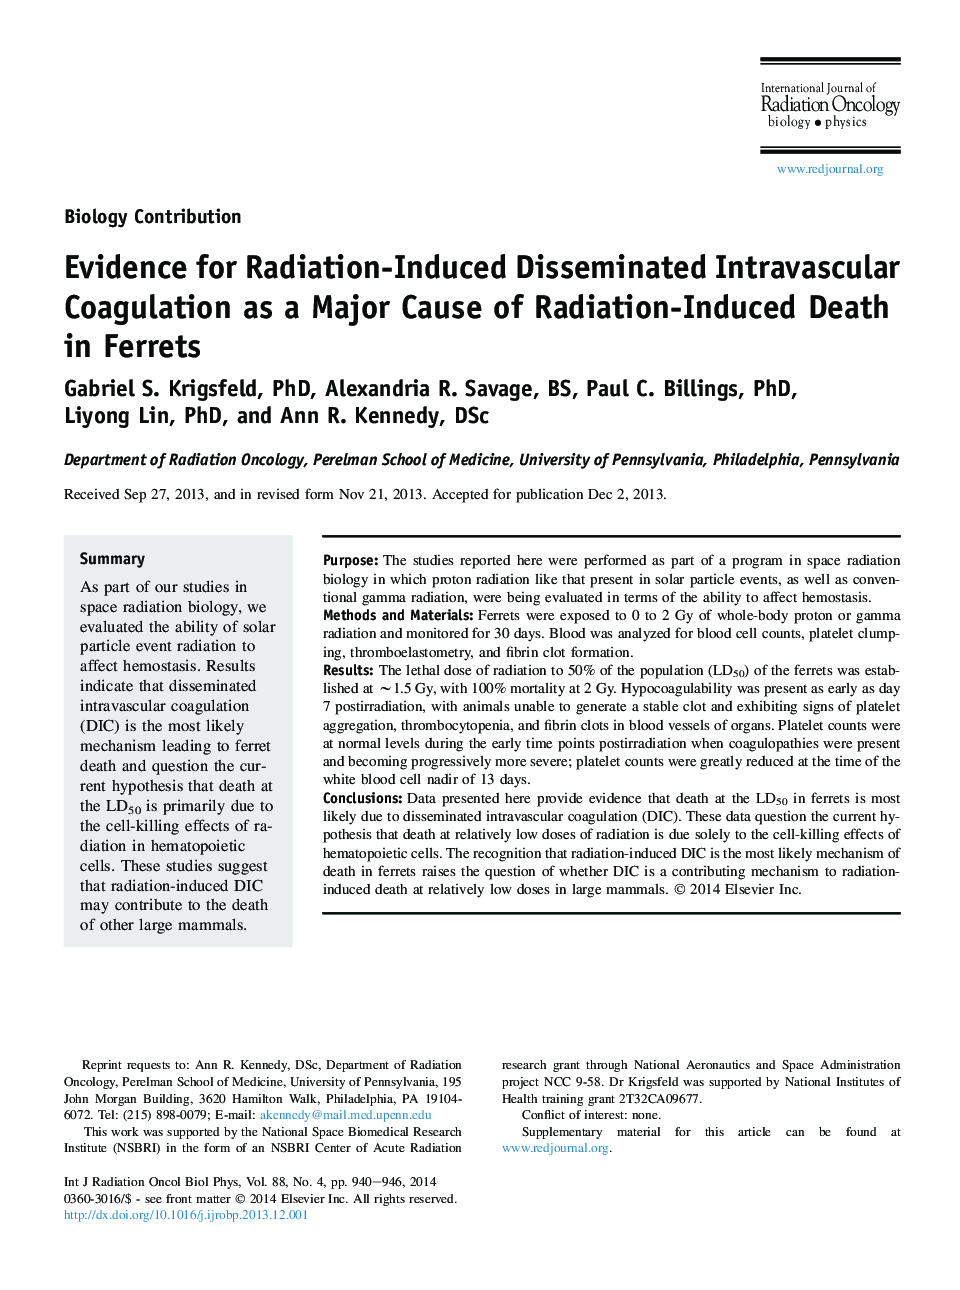 Evidence for Radiation-Induced Disseminated Intravascular Coagulation as a Major Cause of Radiation-Induced Death in Ferrets